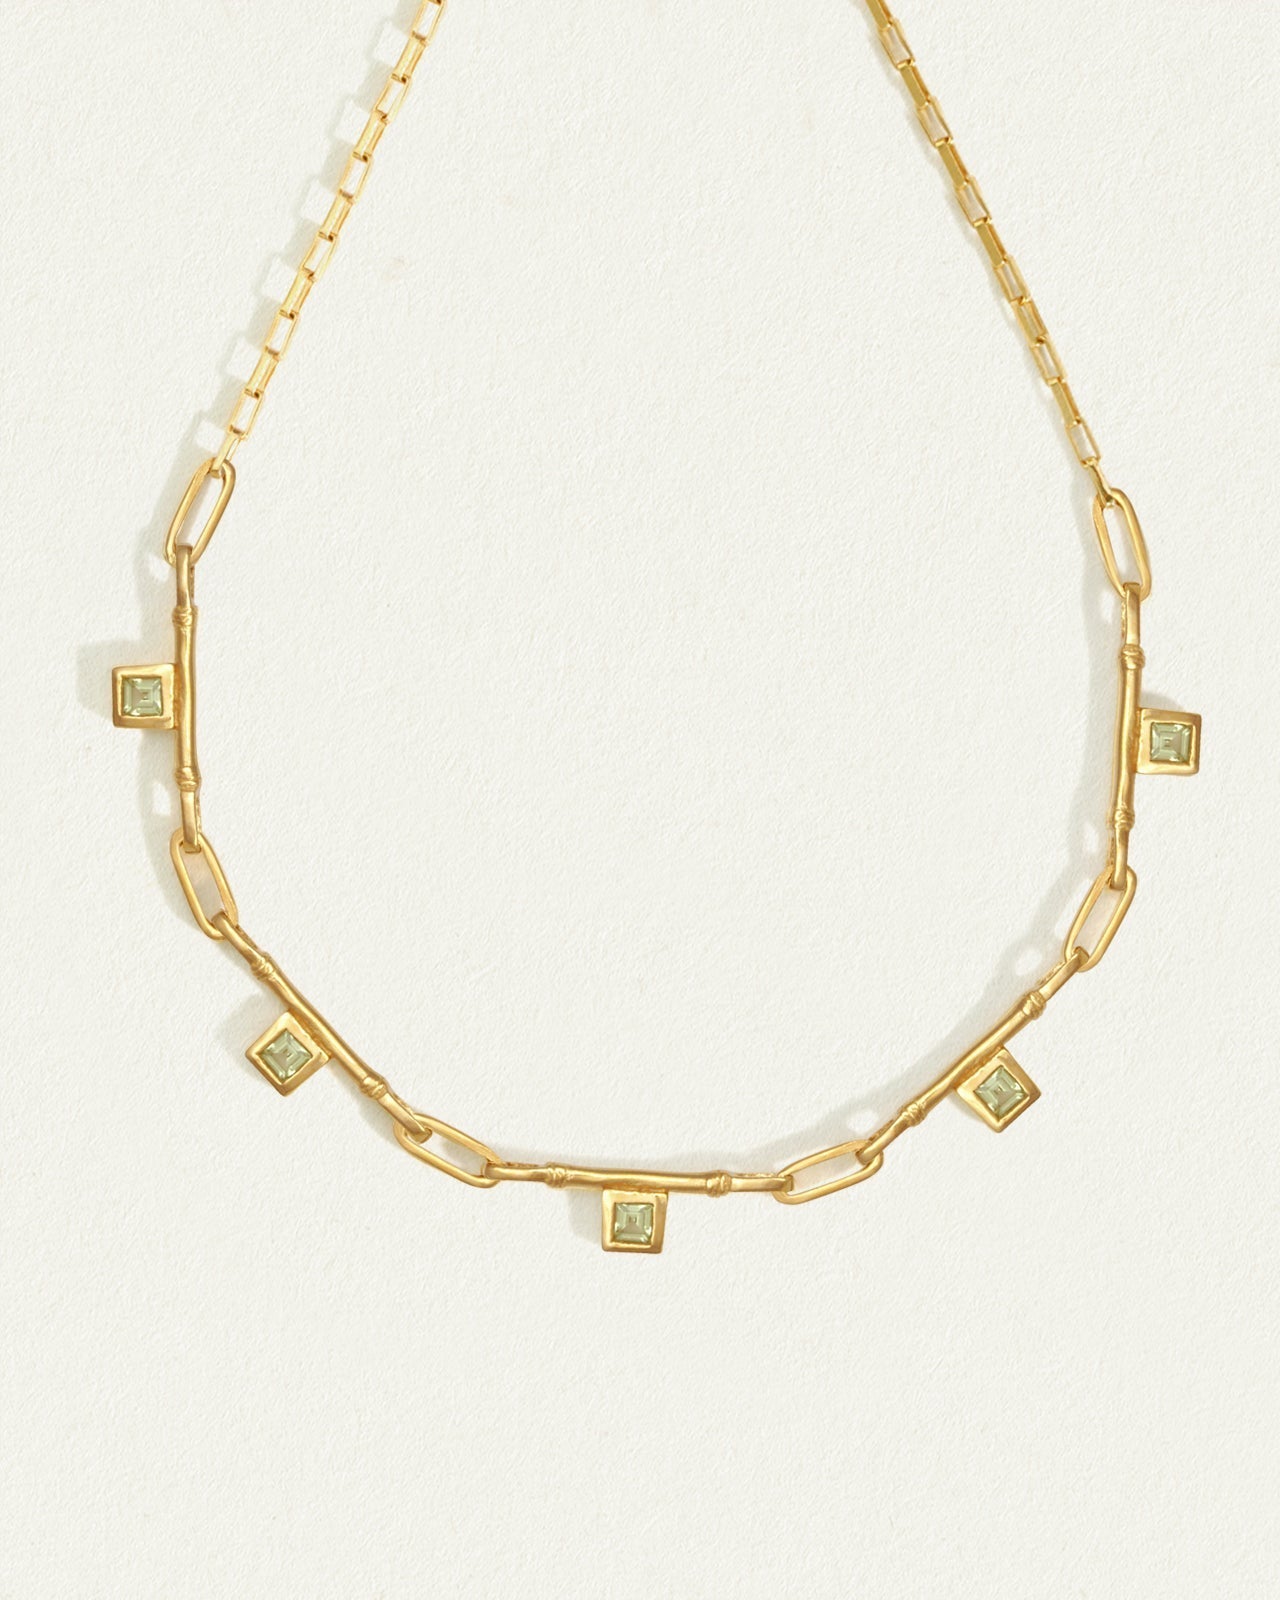 Xanthe Necklace Gold